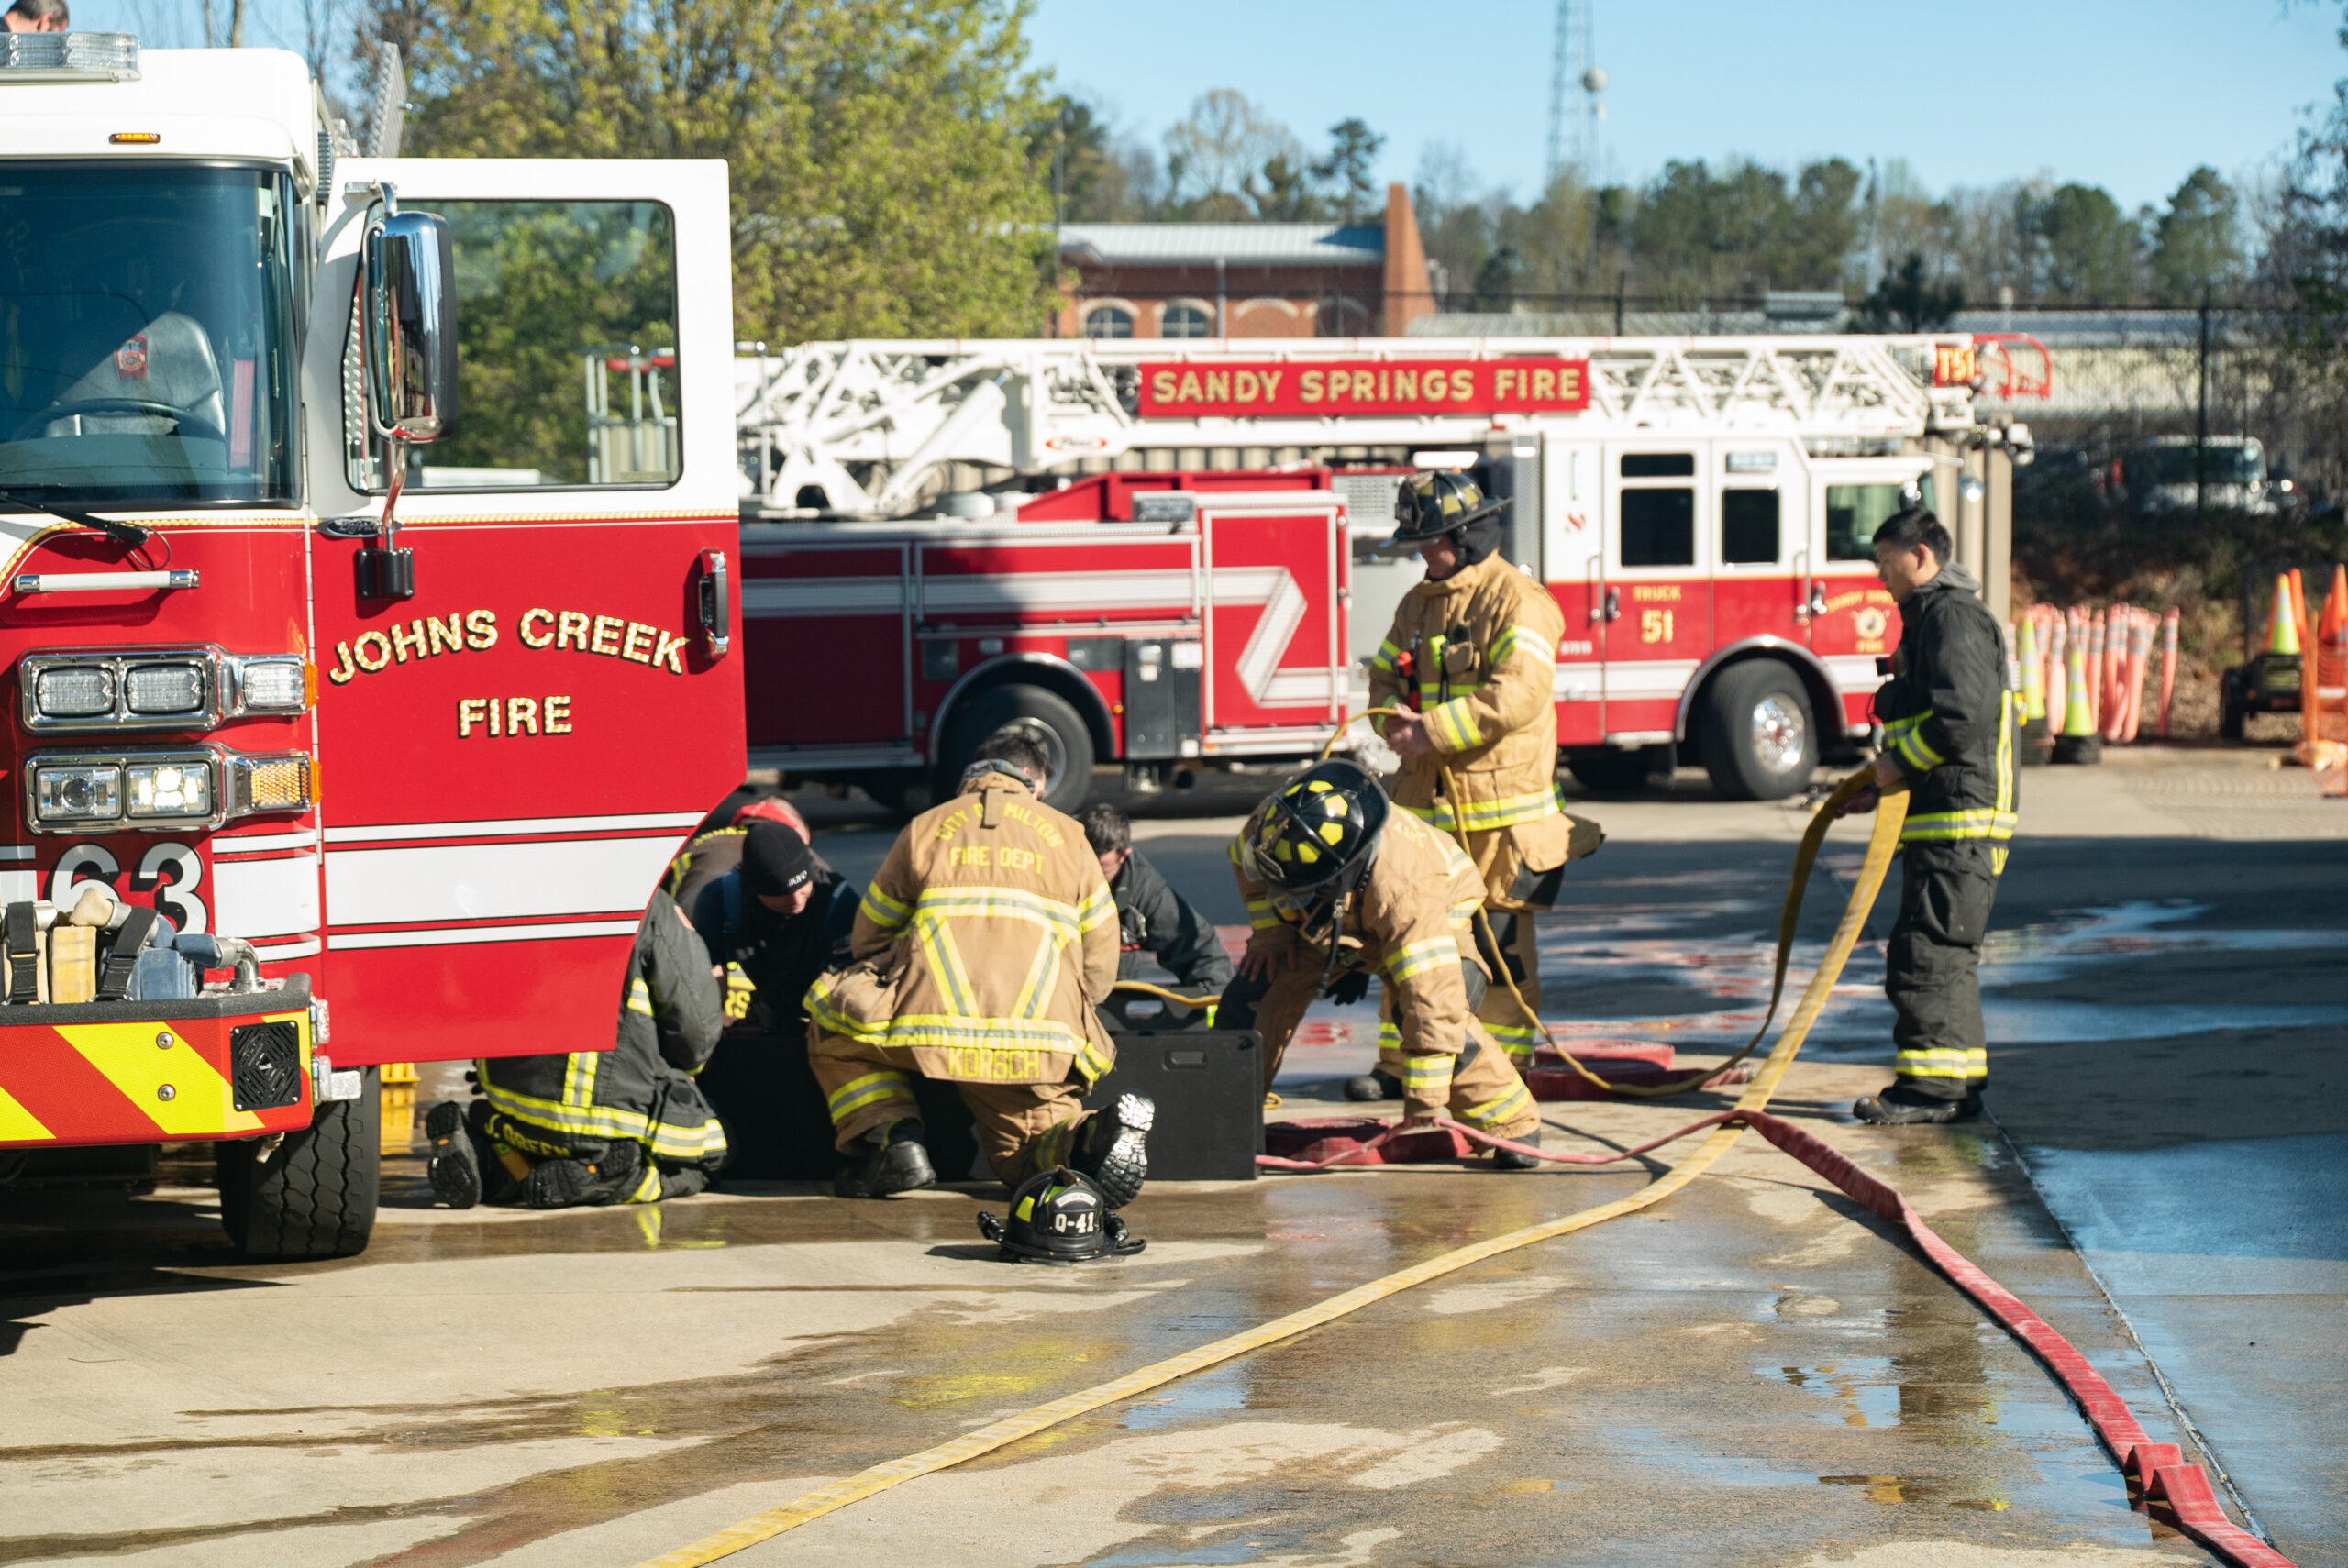 Fire department training with hoses near a fire truck